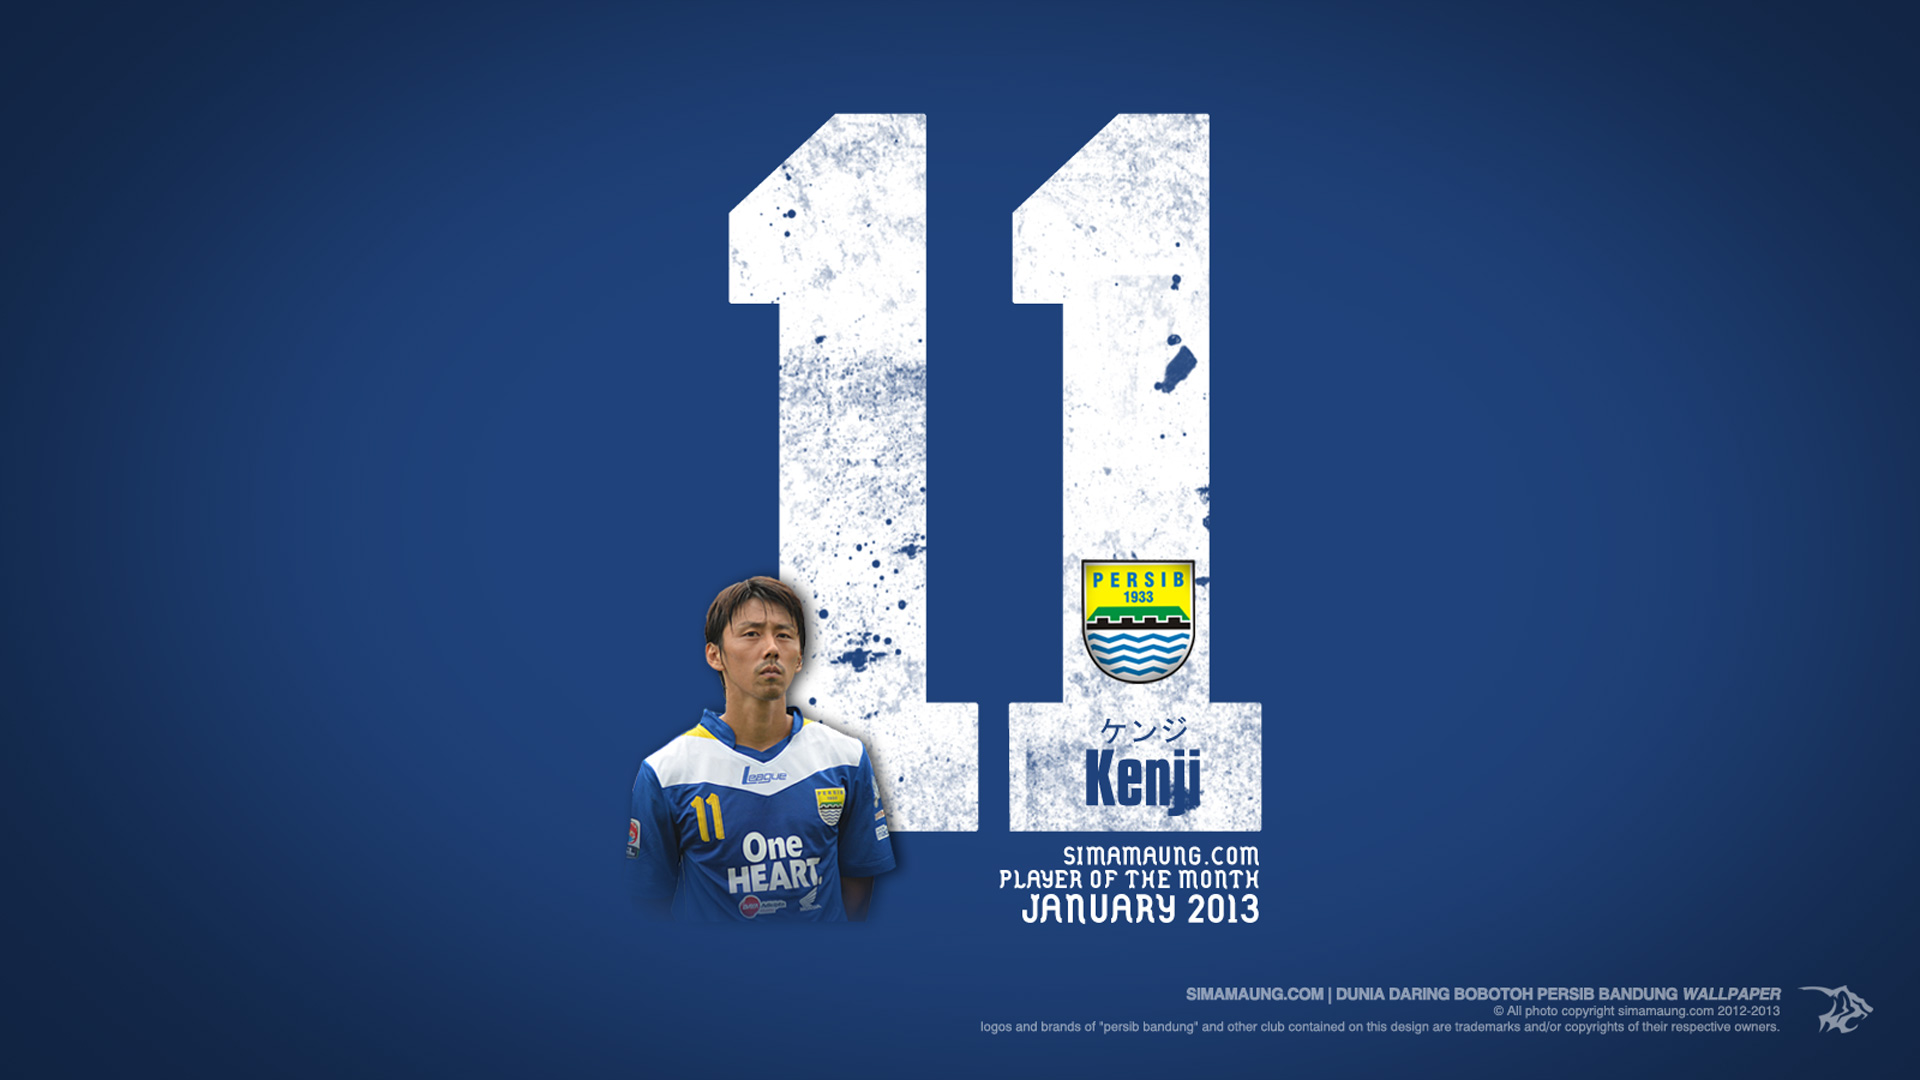 persib day wallpaper,product,brand,advertising,font,sky